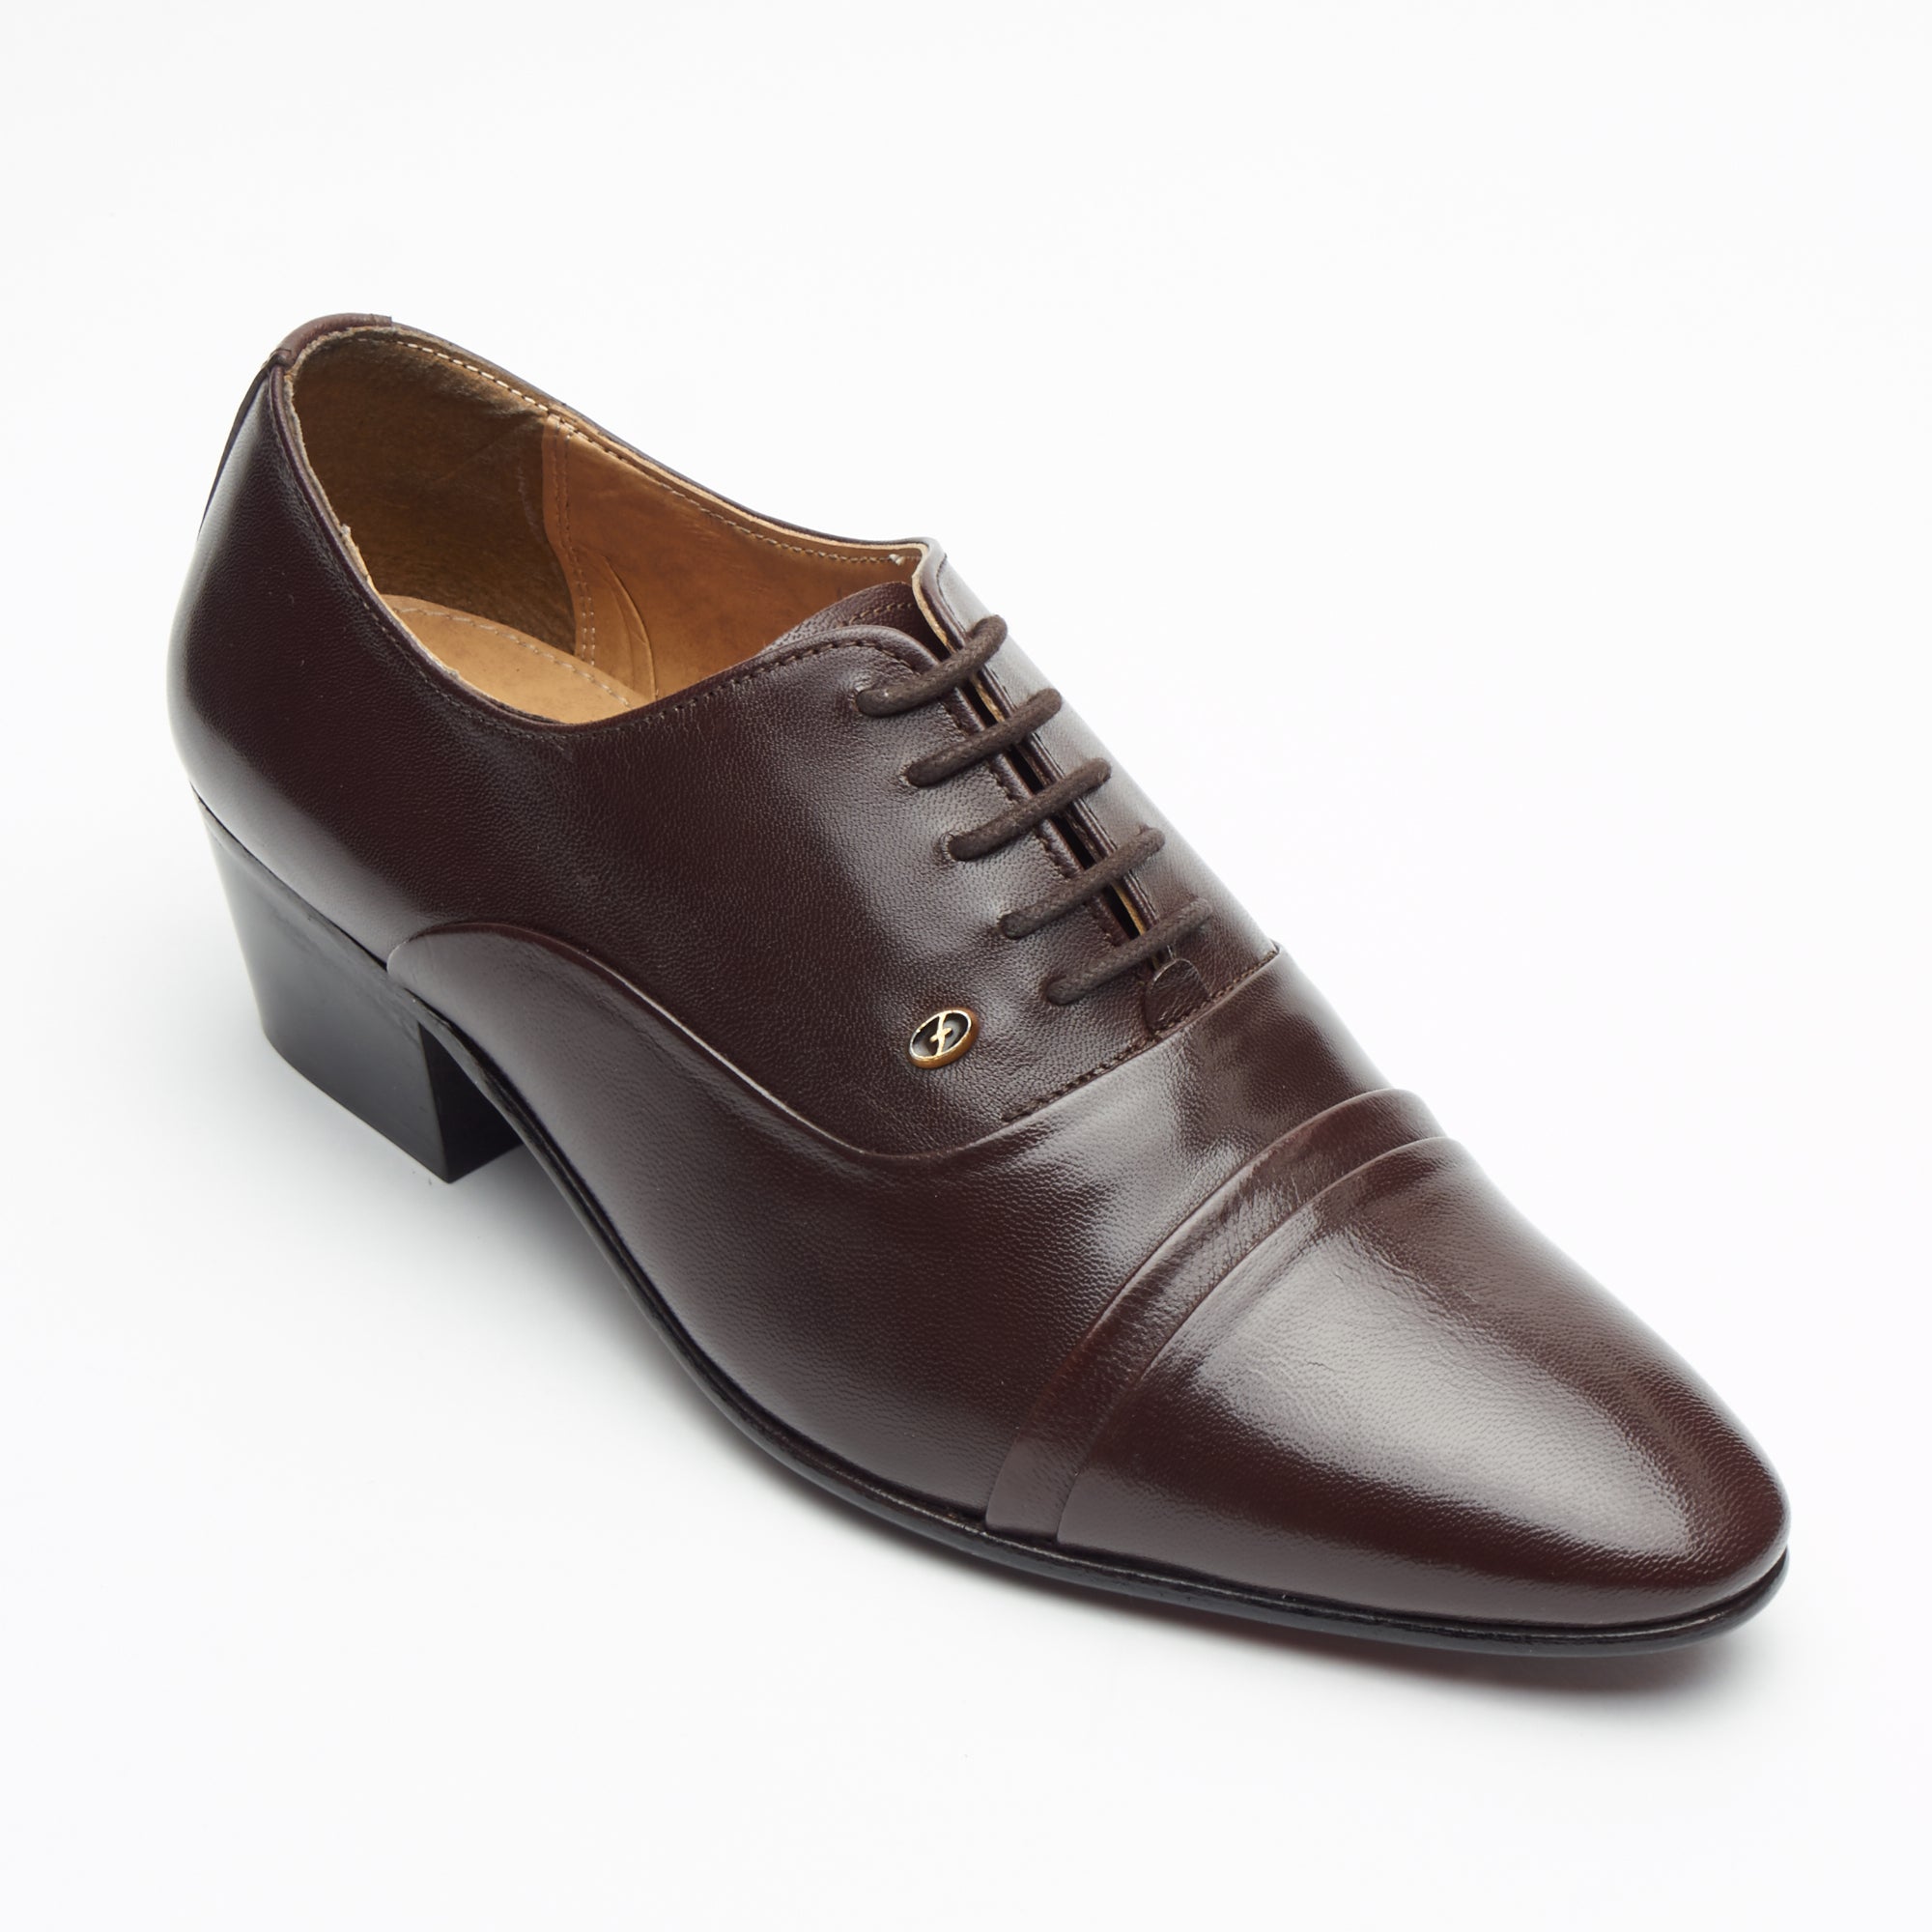 Buy online Black You Will Love Light Weight Formal Shoe. It Features A  Synthetic Upper, Leather Material Inner, Slipon On Style For Easy Fit, Soft  Lining, Cushiony Memory Foam Insole Comfort And